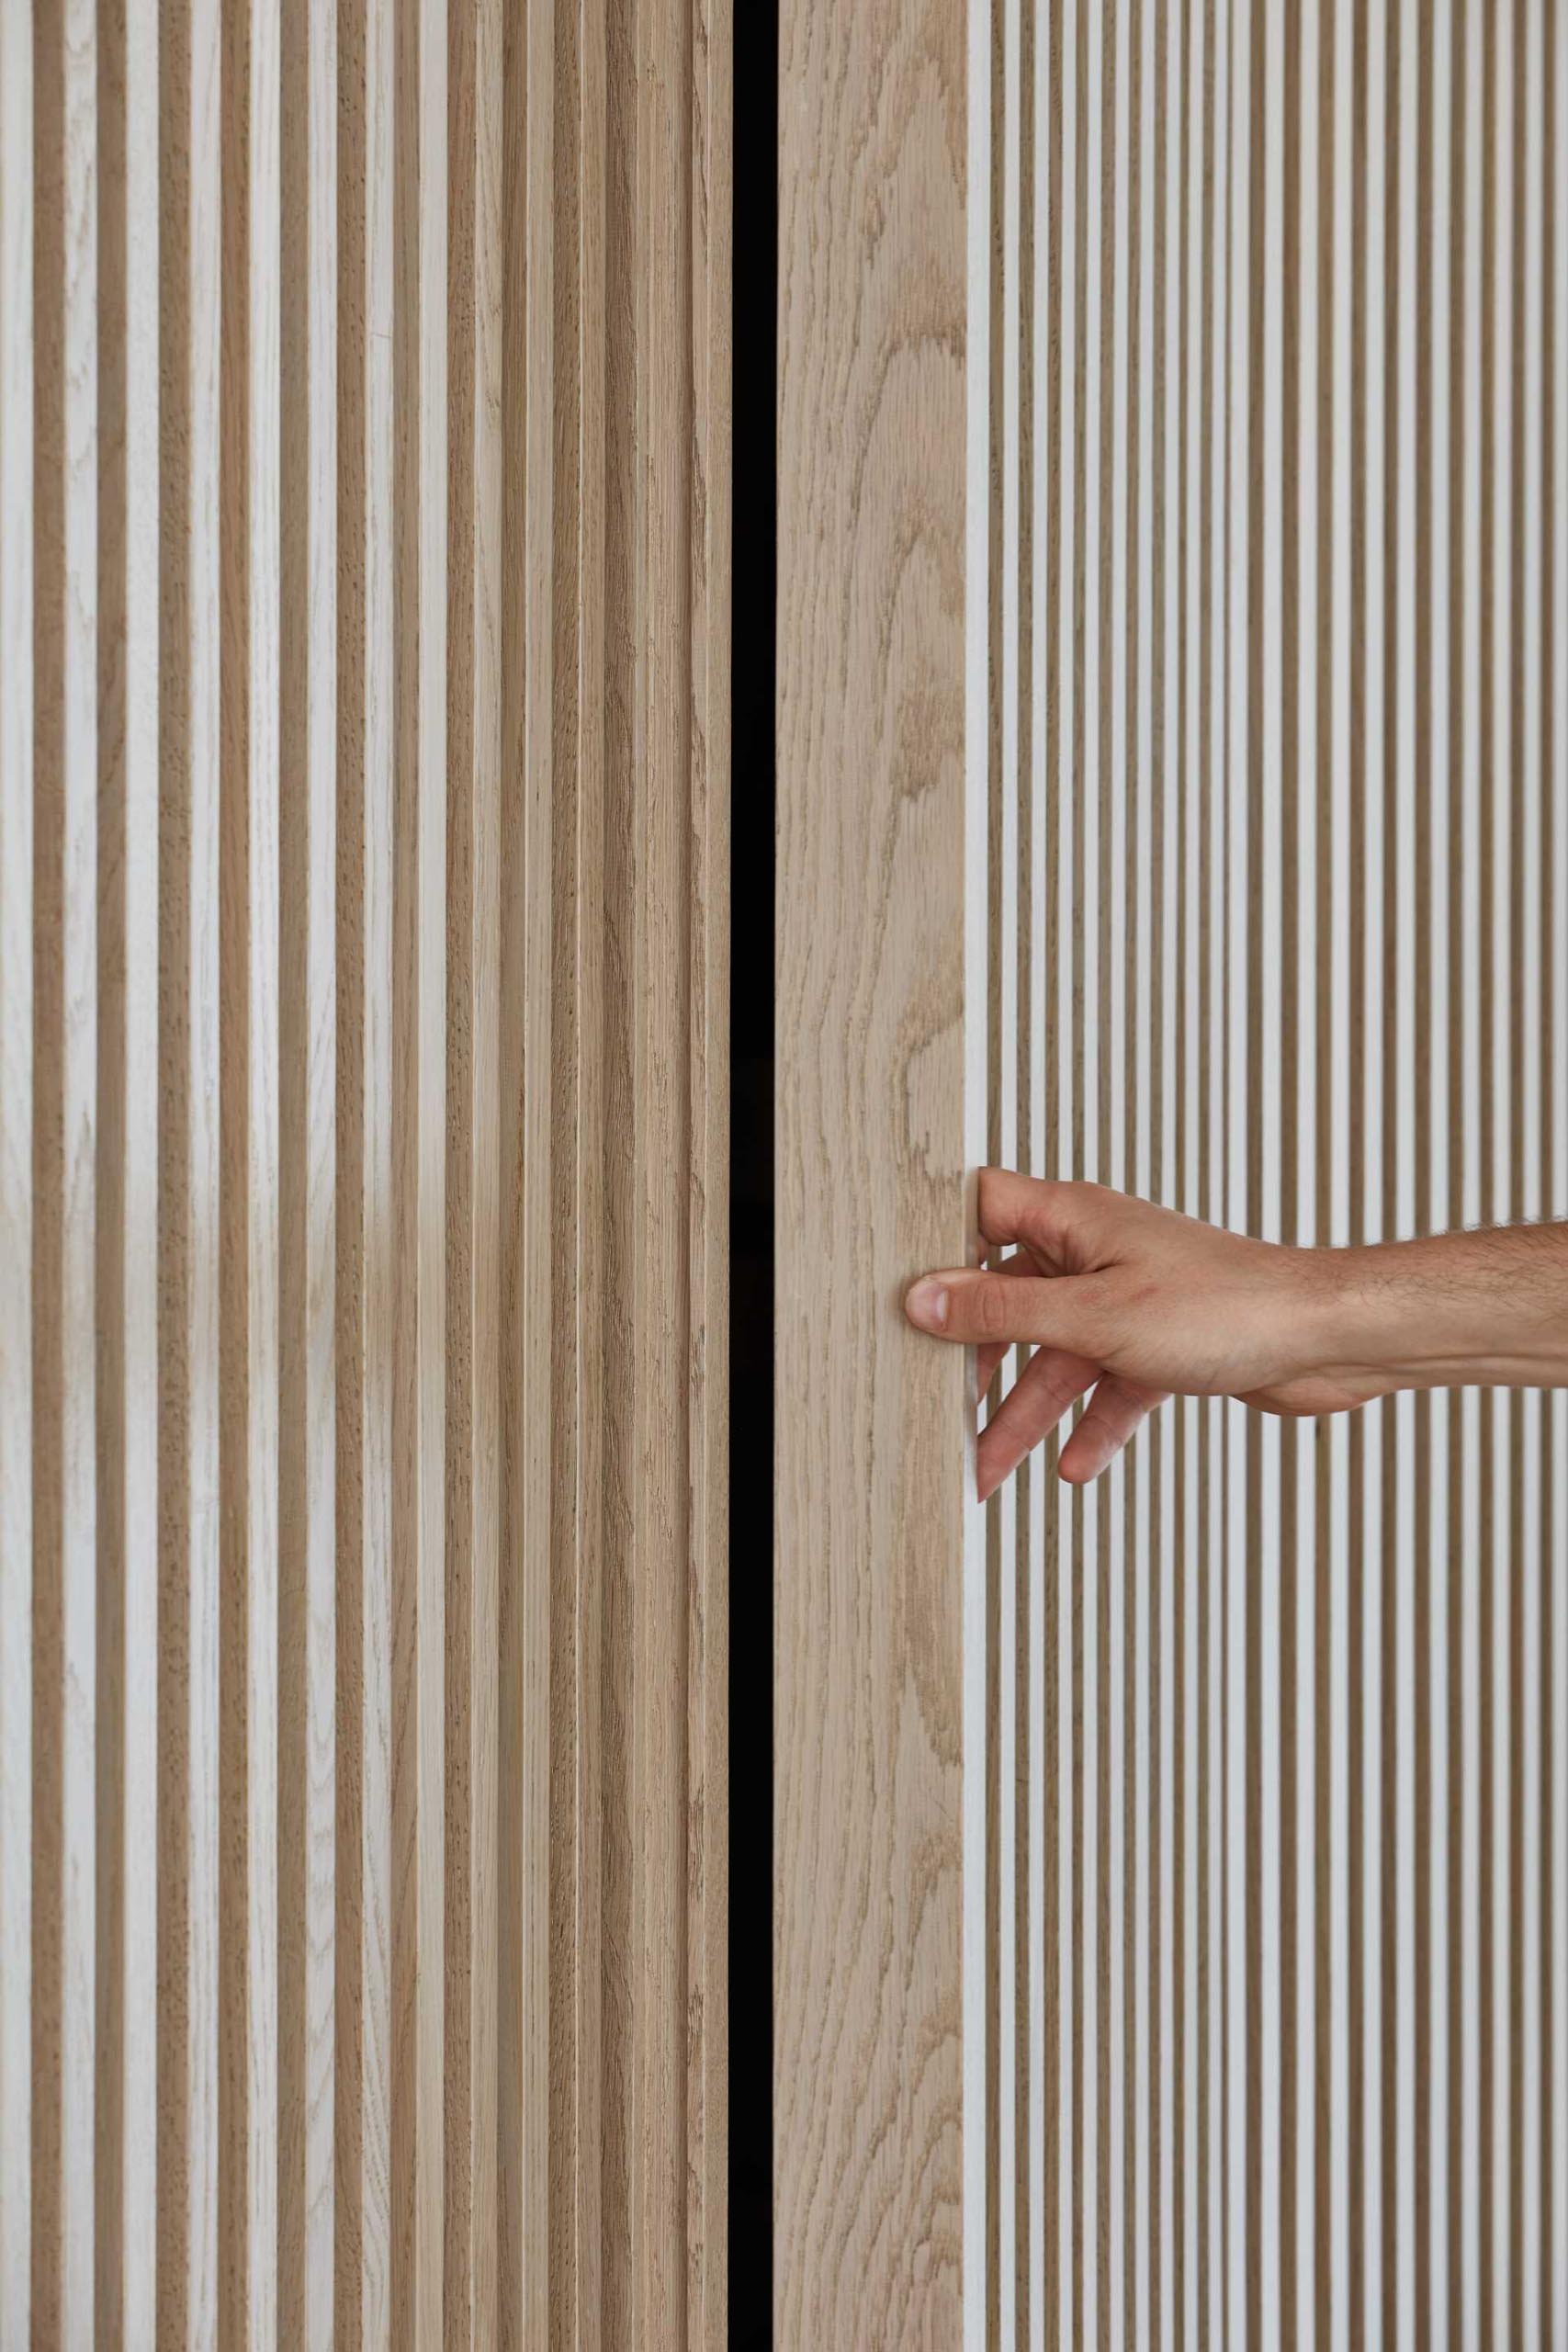 A wood slat wall hides storage within.